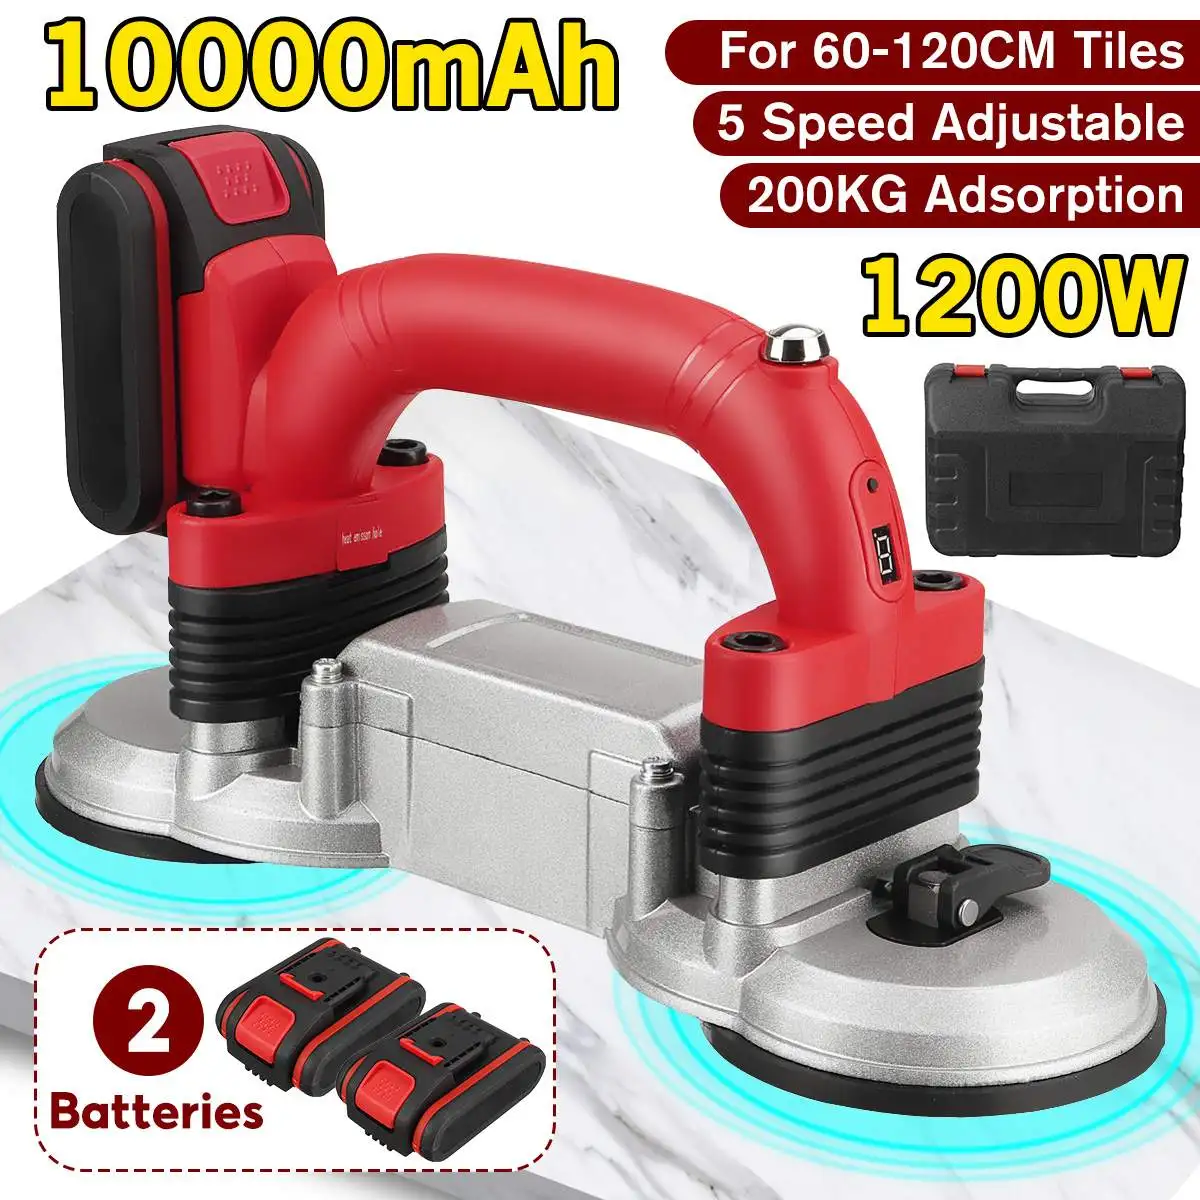 60-120mm Tiles Vibrator Tiling Tiles Machine 5 Speed Adjustable Suction Cup Automatic Floor Vibrator Leveling Tool with Battery